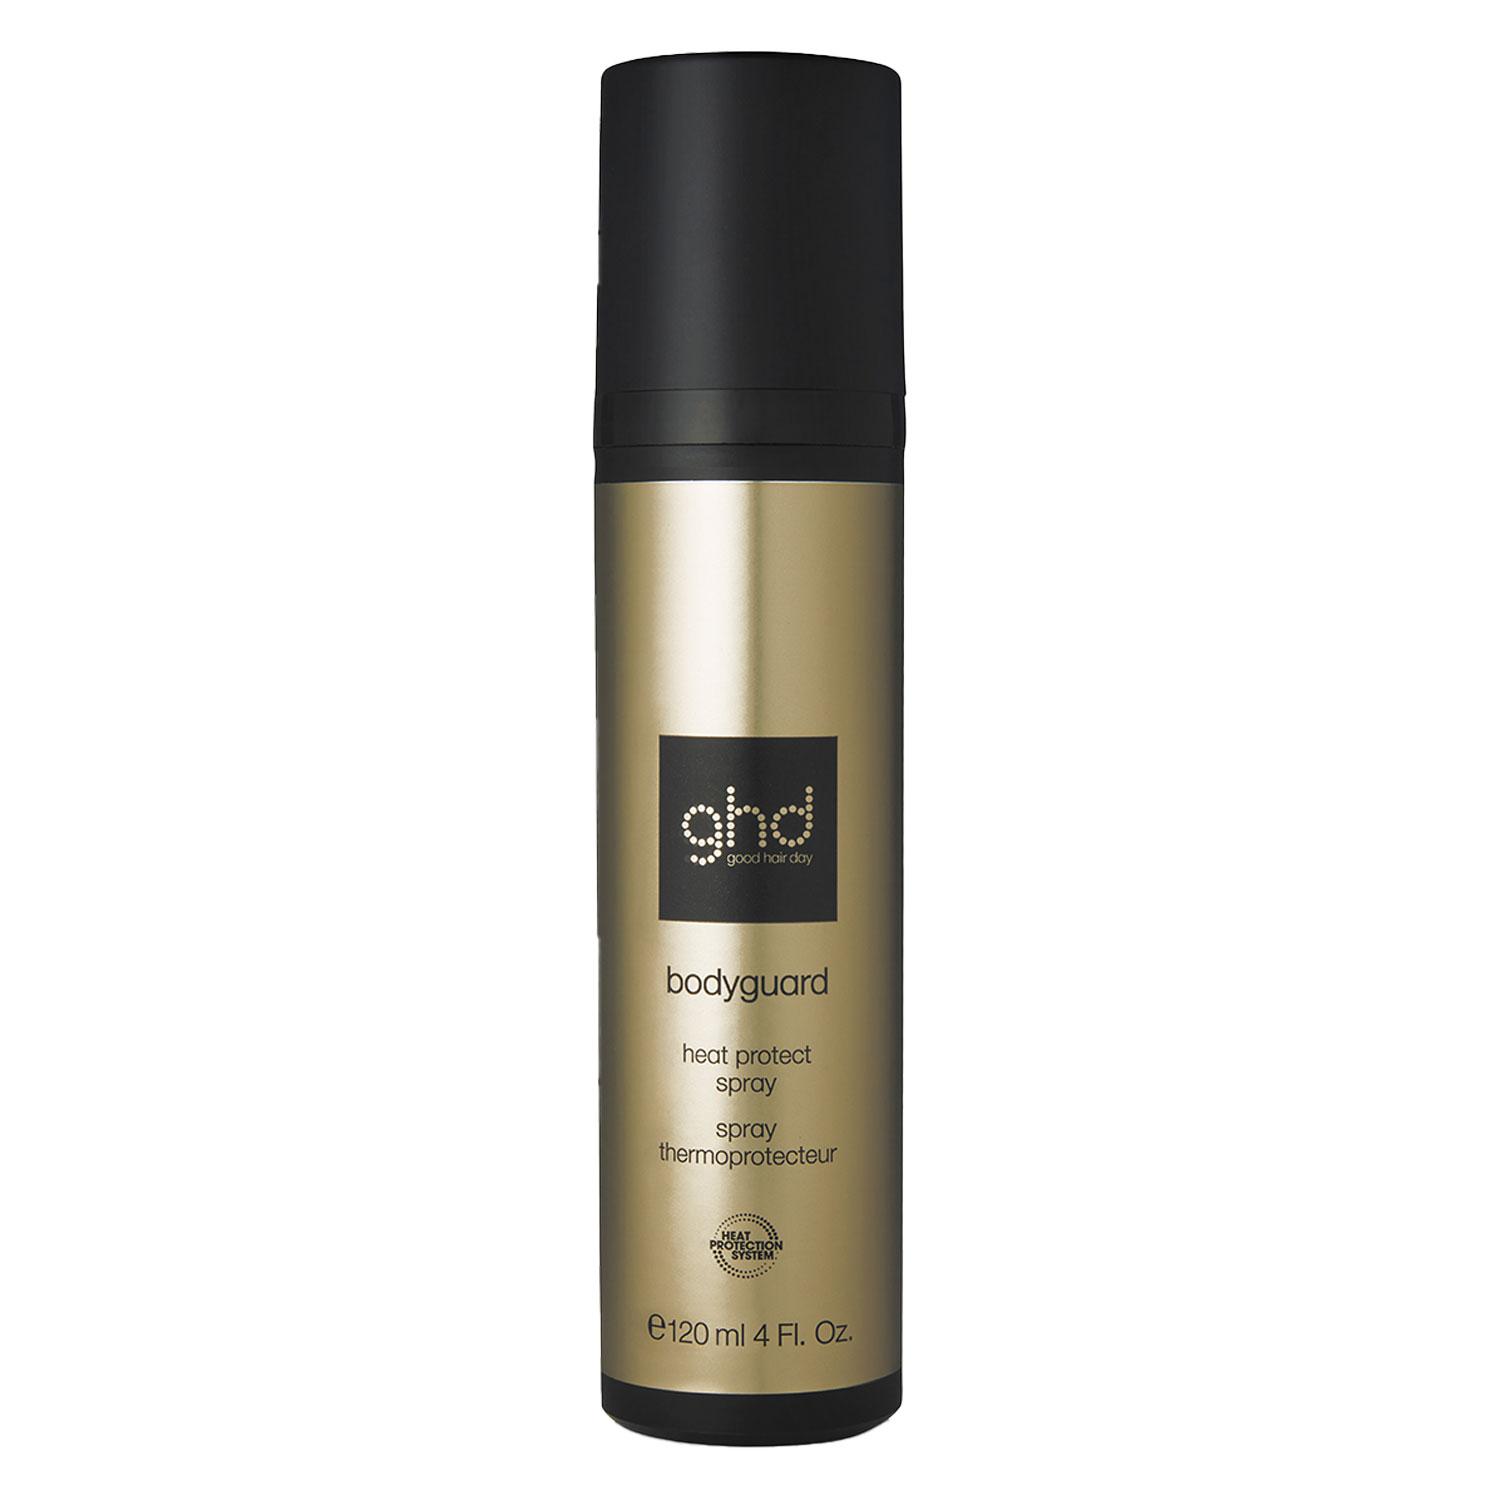 ghd Heat Protection Styling System - Bodyguard Heat Protect Spray